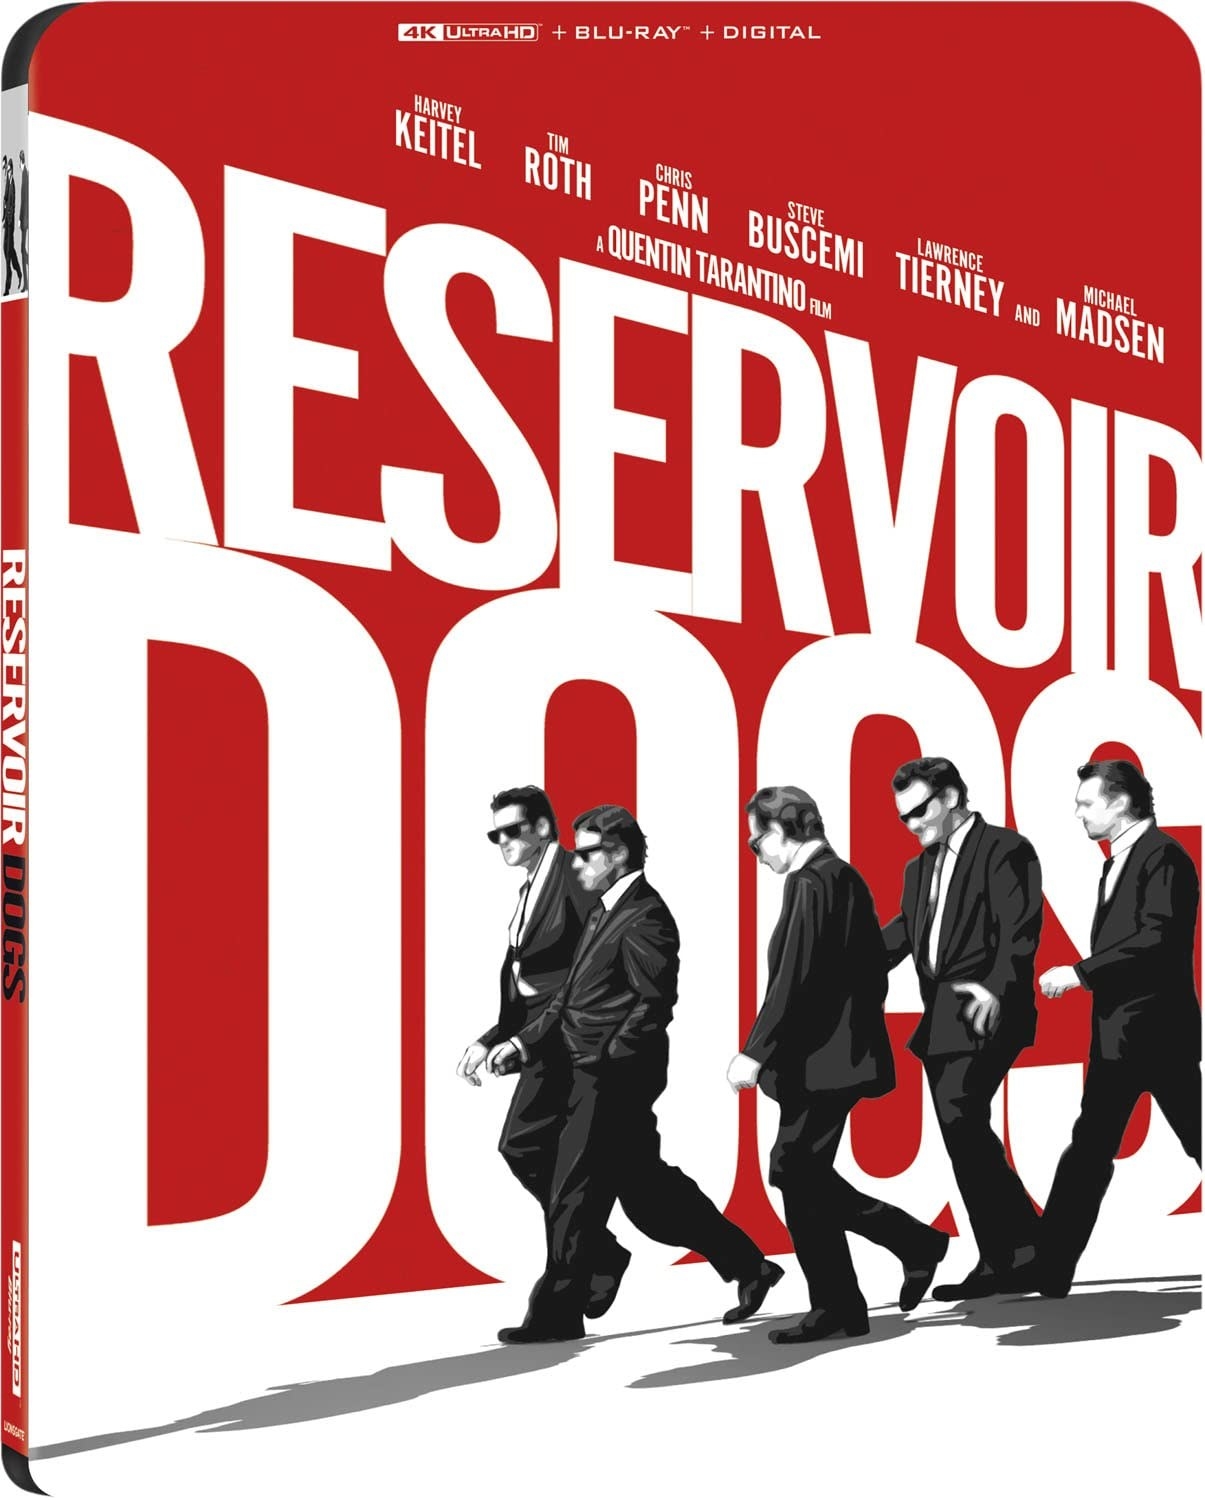 A blu ray with the title of the movie in giant letters, and the characters walking in their suits in front